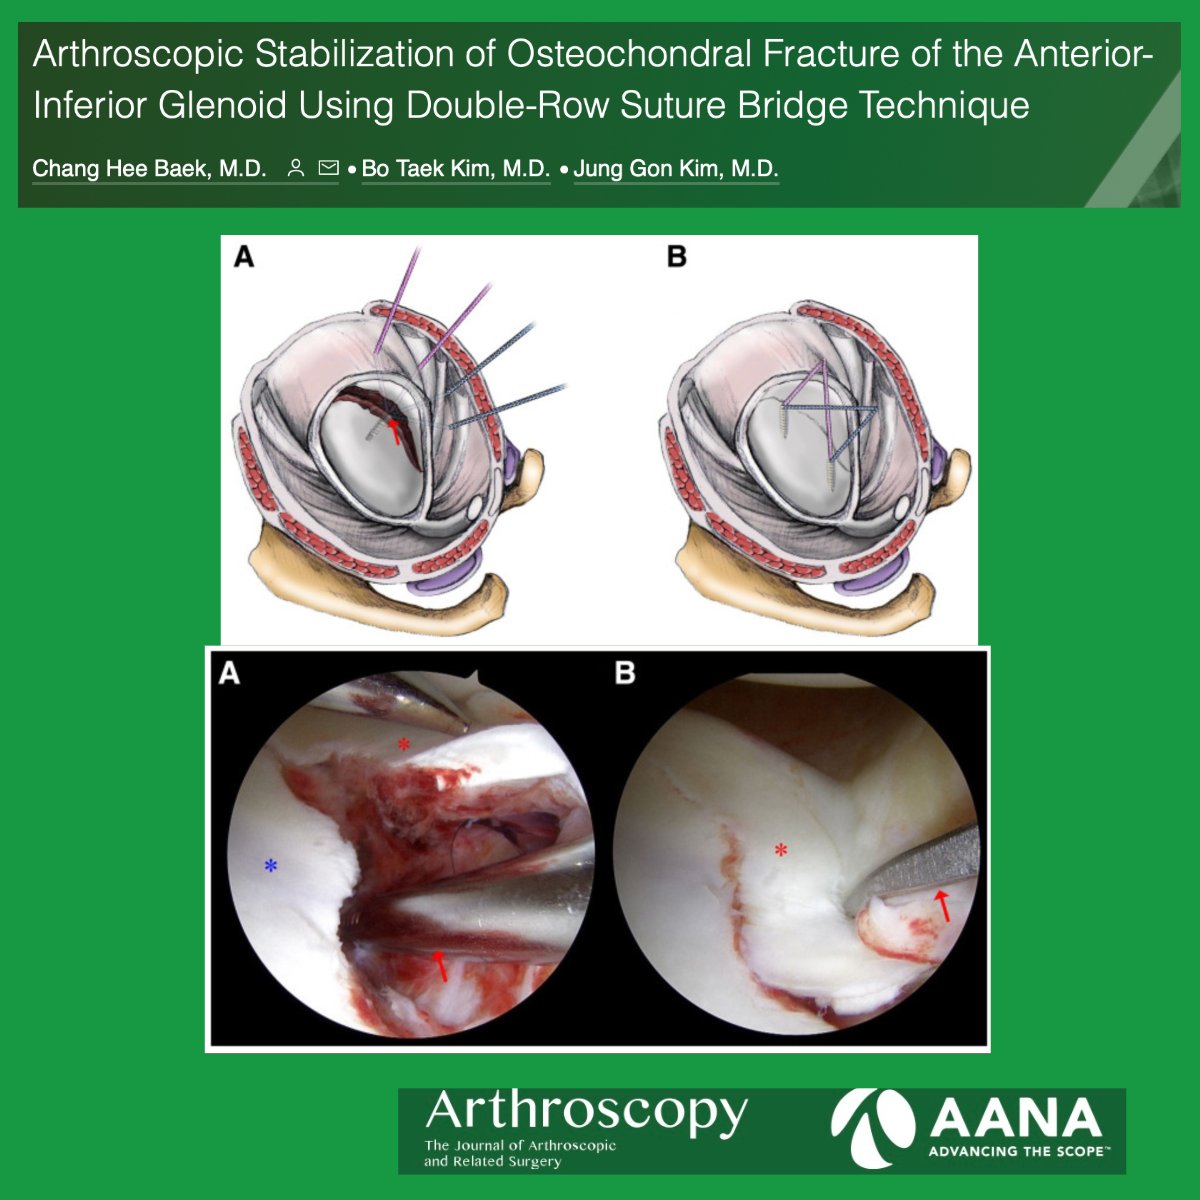 Arthroscopic Stabilization of Osteochondral Fracture of the Anterior-Inferior Glenoid Using Double-Row Suture Bridge Technique ow.ly/zE3K50QeRO3